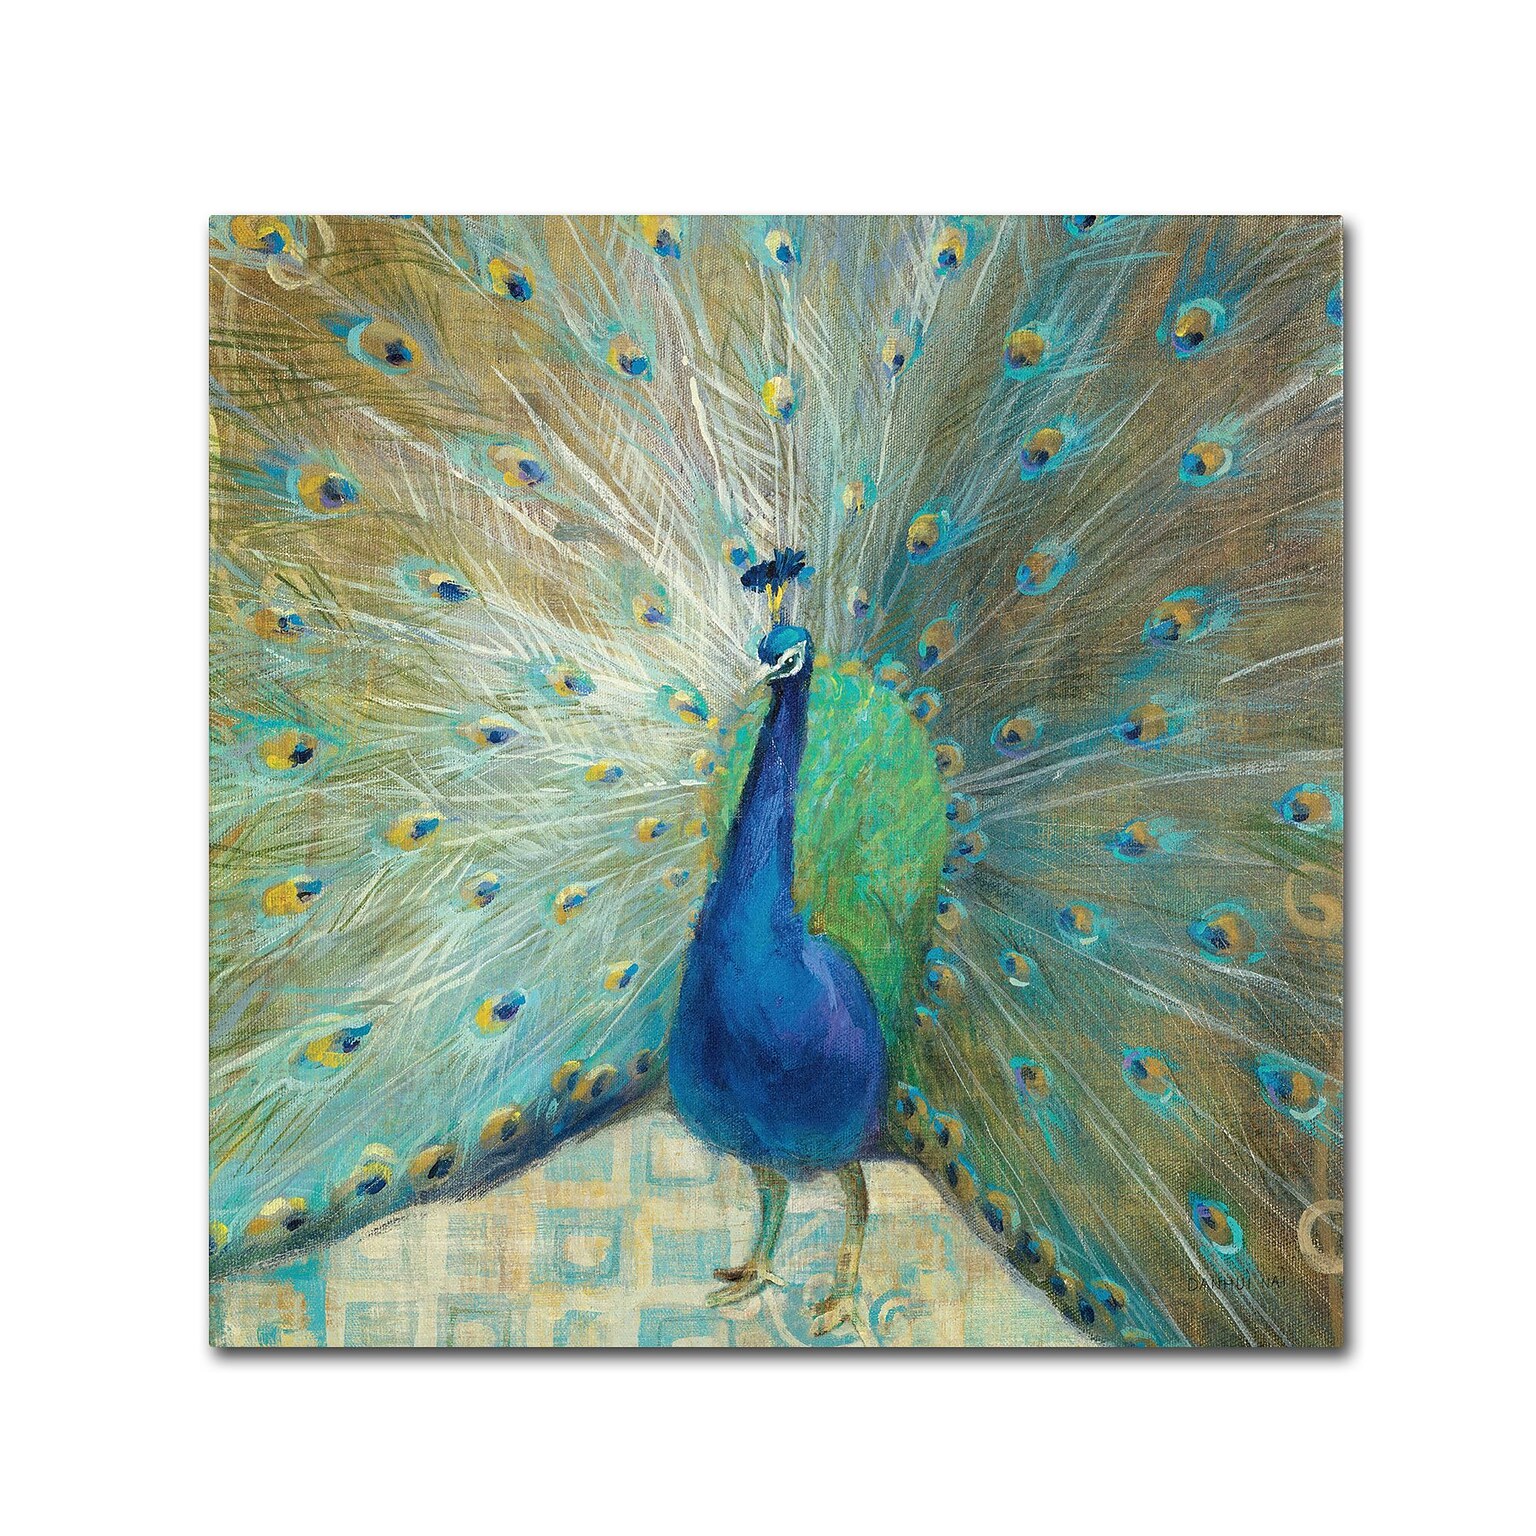 Trademark Danhui Nai Blue Peacock on Gold Gallery-Wrapped Canvas Art, 18 x 18